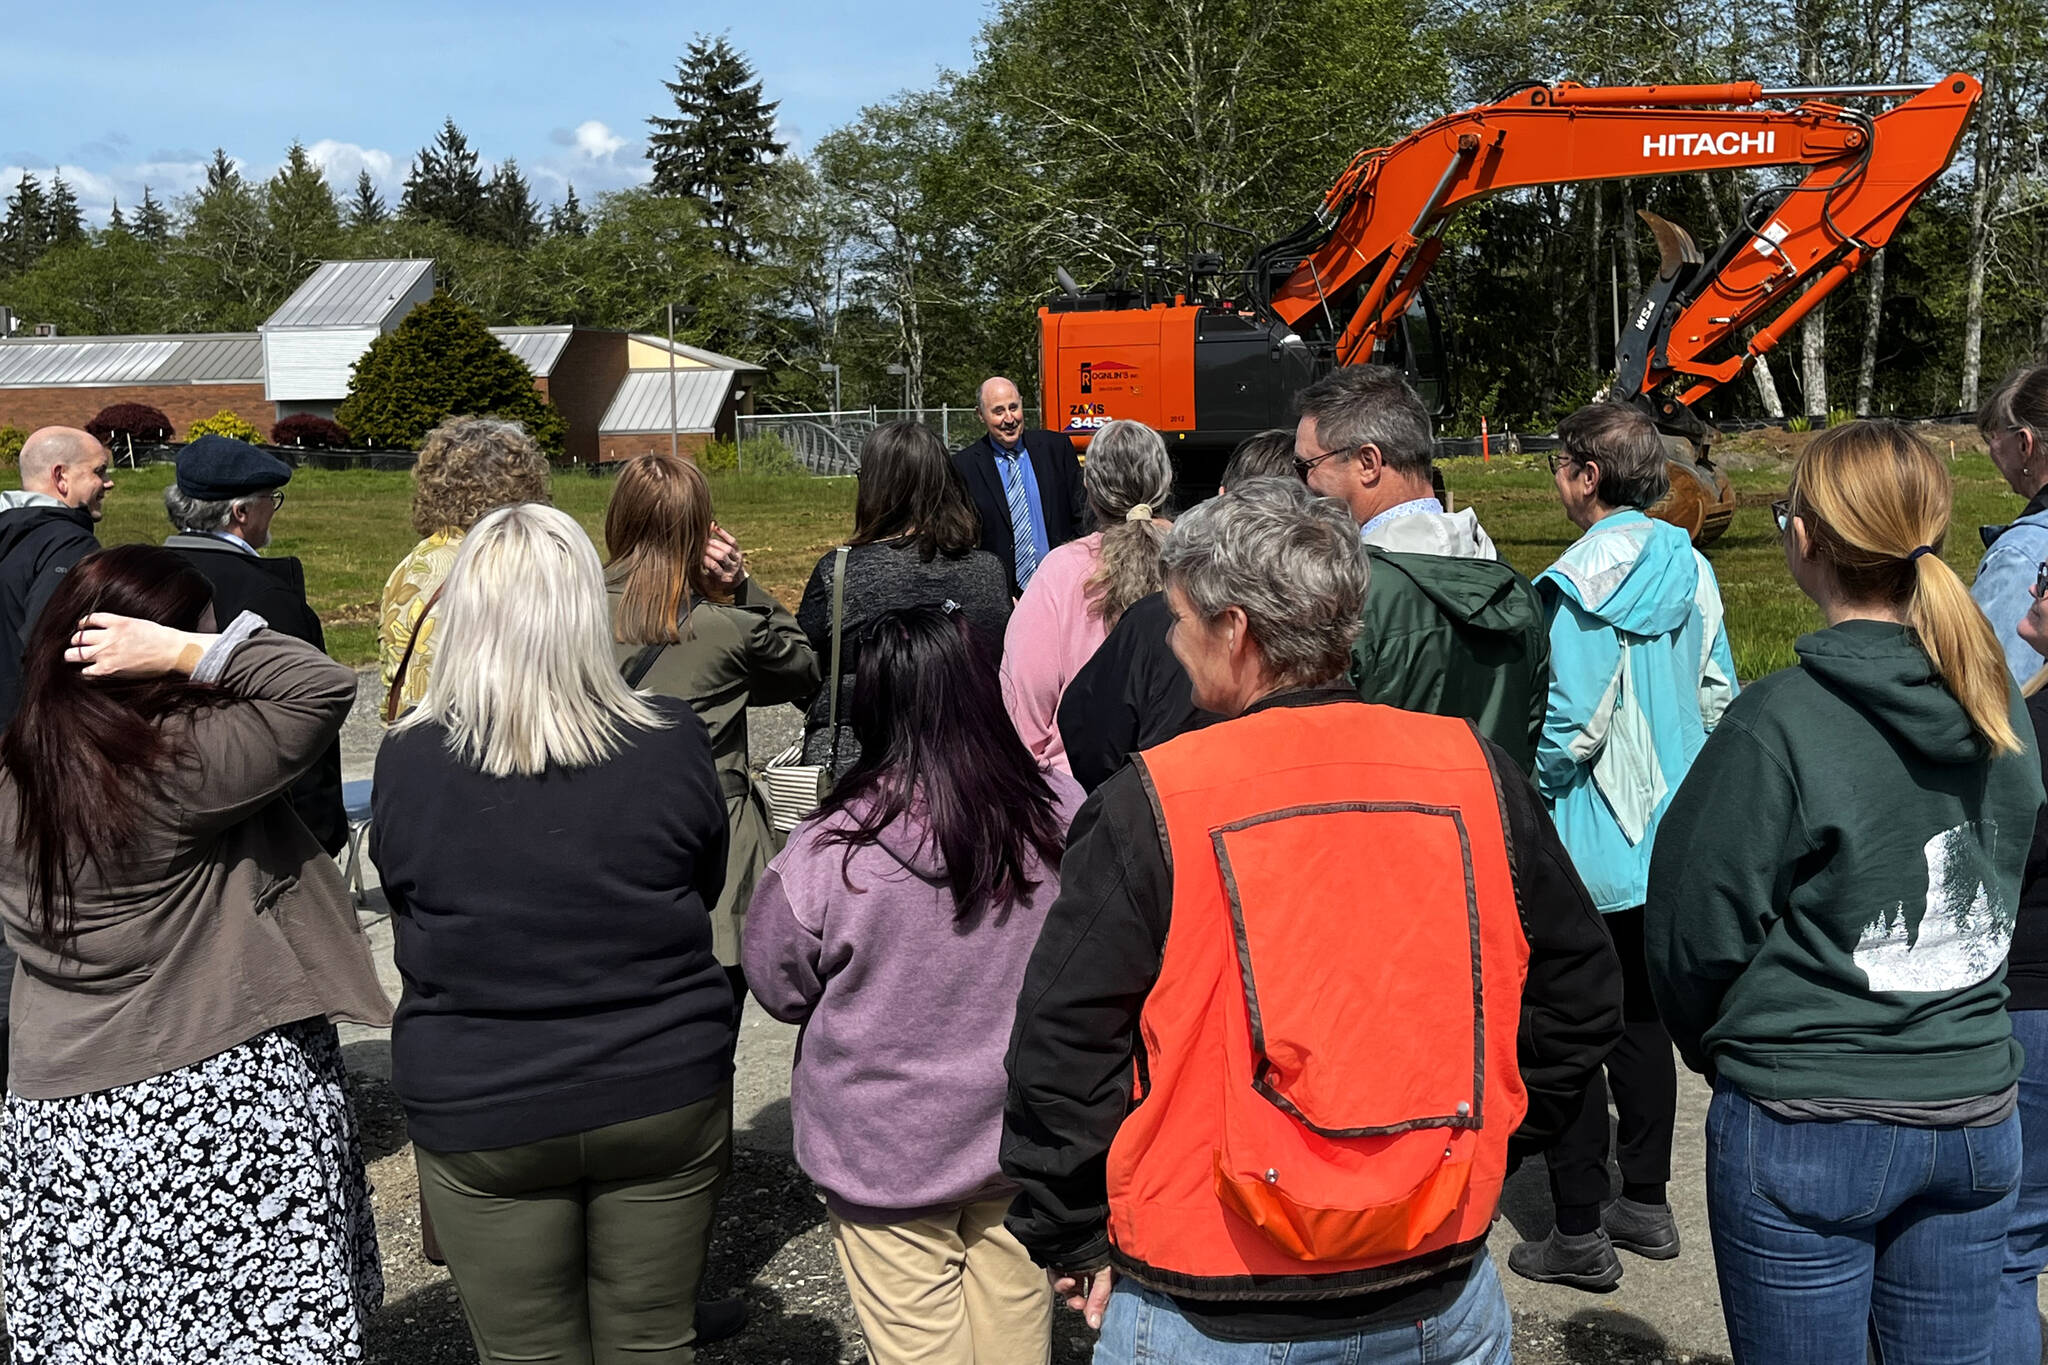 Allen Leister | The Daily World 
Audience members gather to listen to Grays Harbor College Board President Ed Brewster, as he explains details of the Student Services & Instruction Building project. The project is set to be completed in fall 2023.